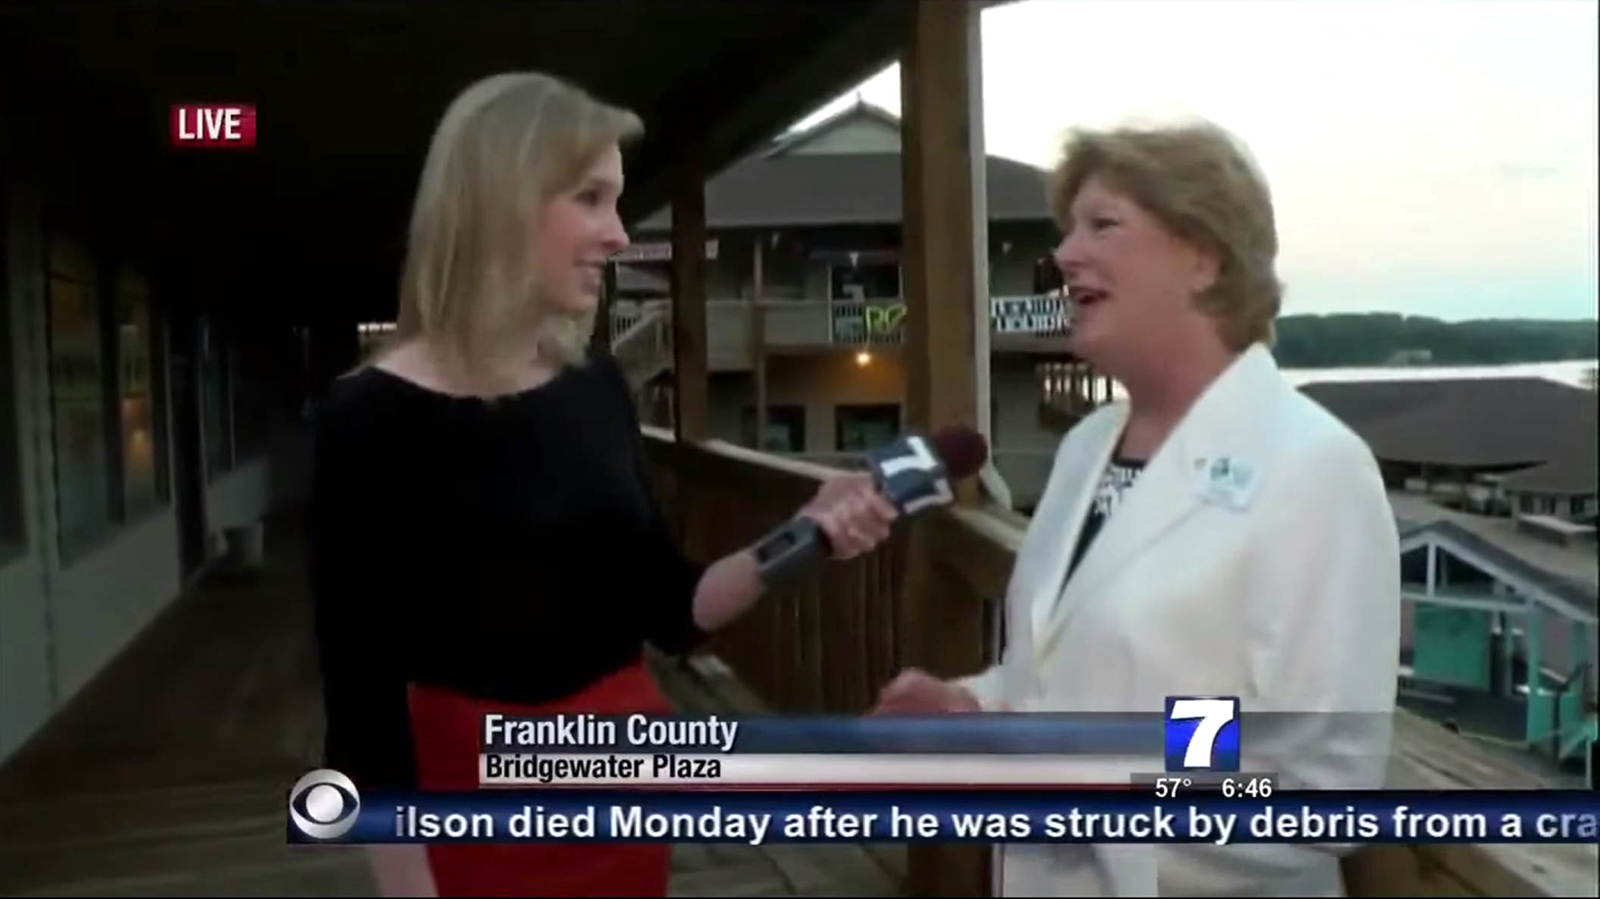 5 years ago today, the Roanoke based station WDBJ was changed forever after two reporters died in an on-air shooting. What's the news room like today? 